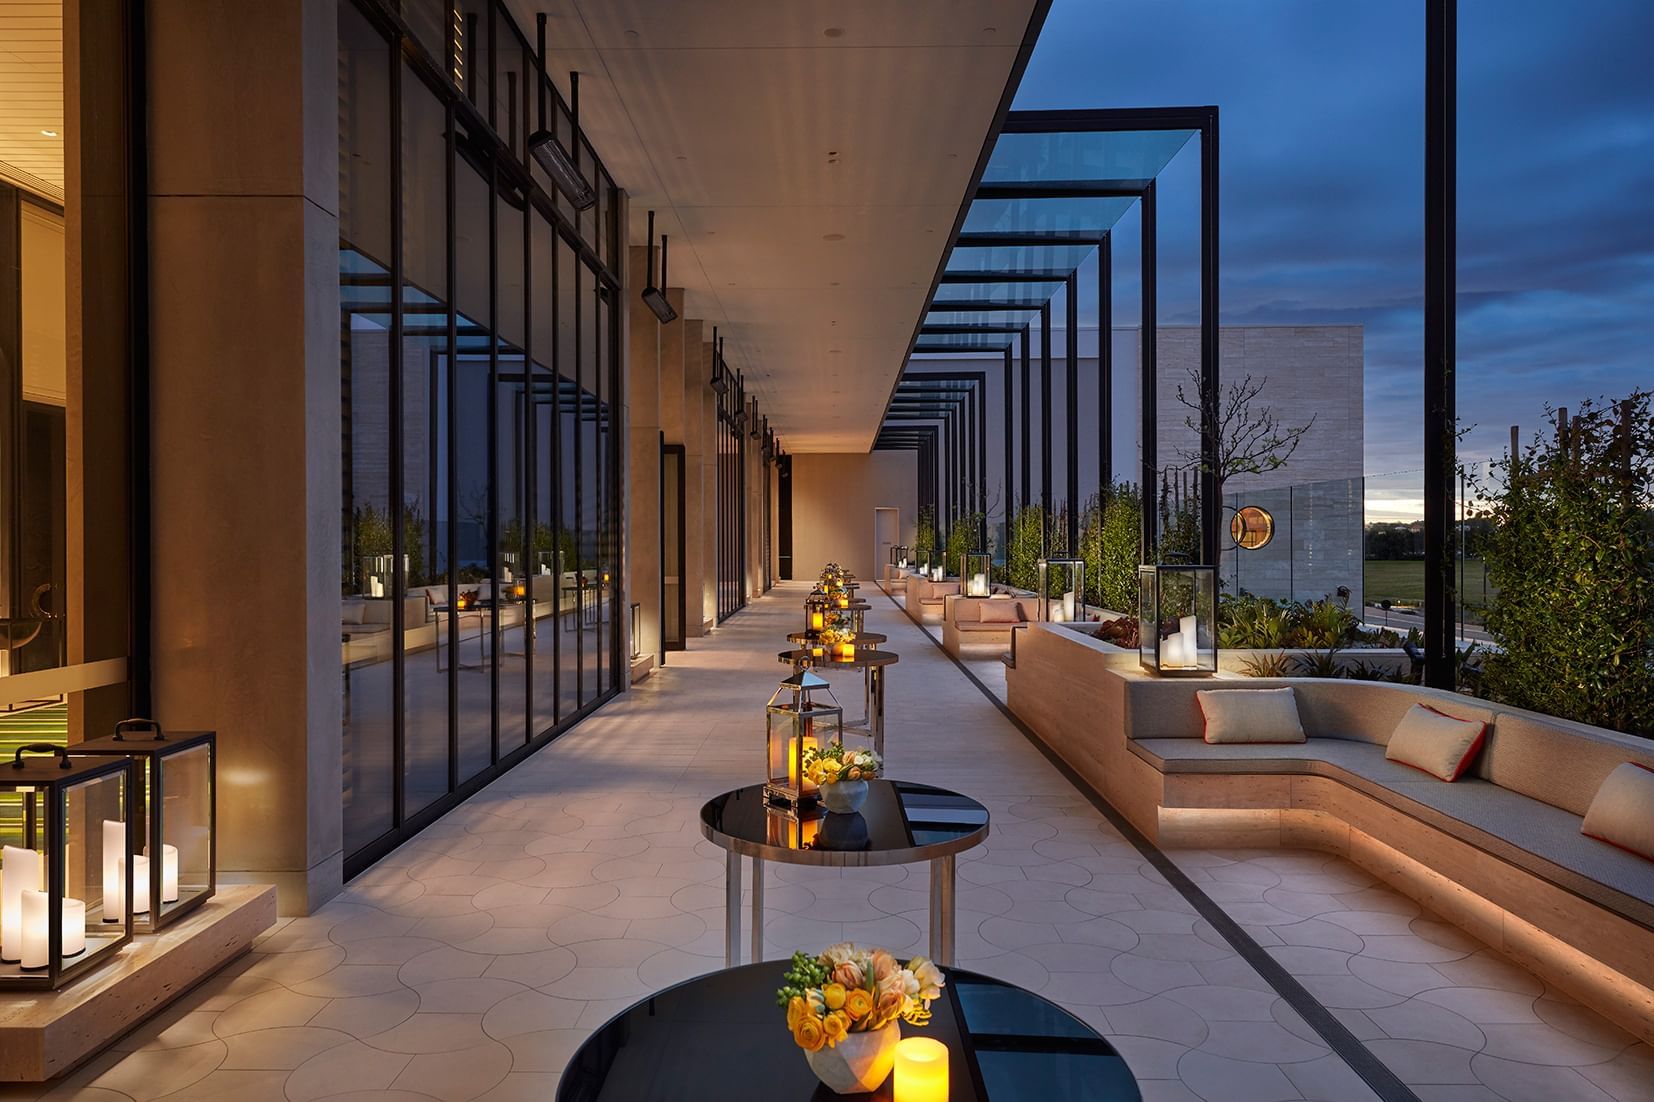 An elegant Lounge area in the terrace at Crown Hotel Perth